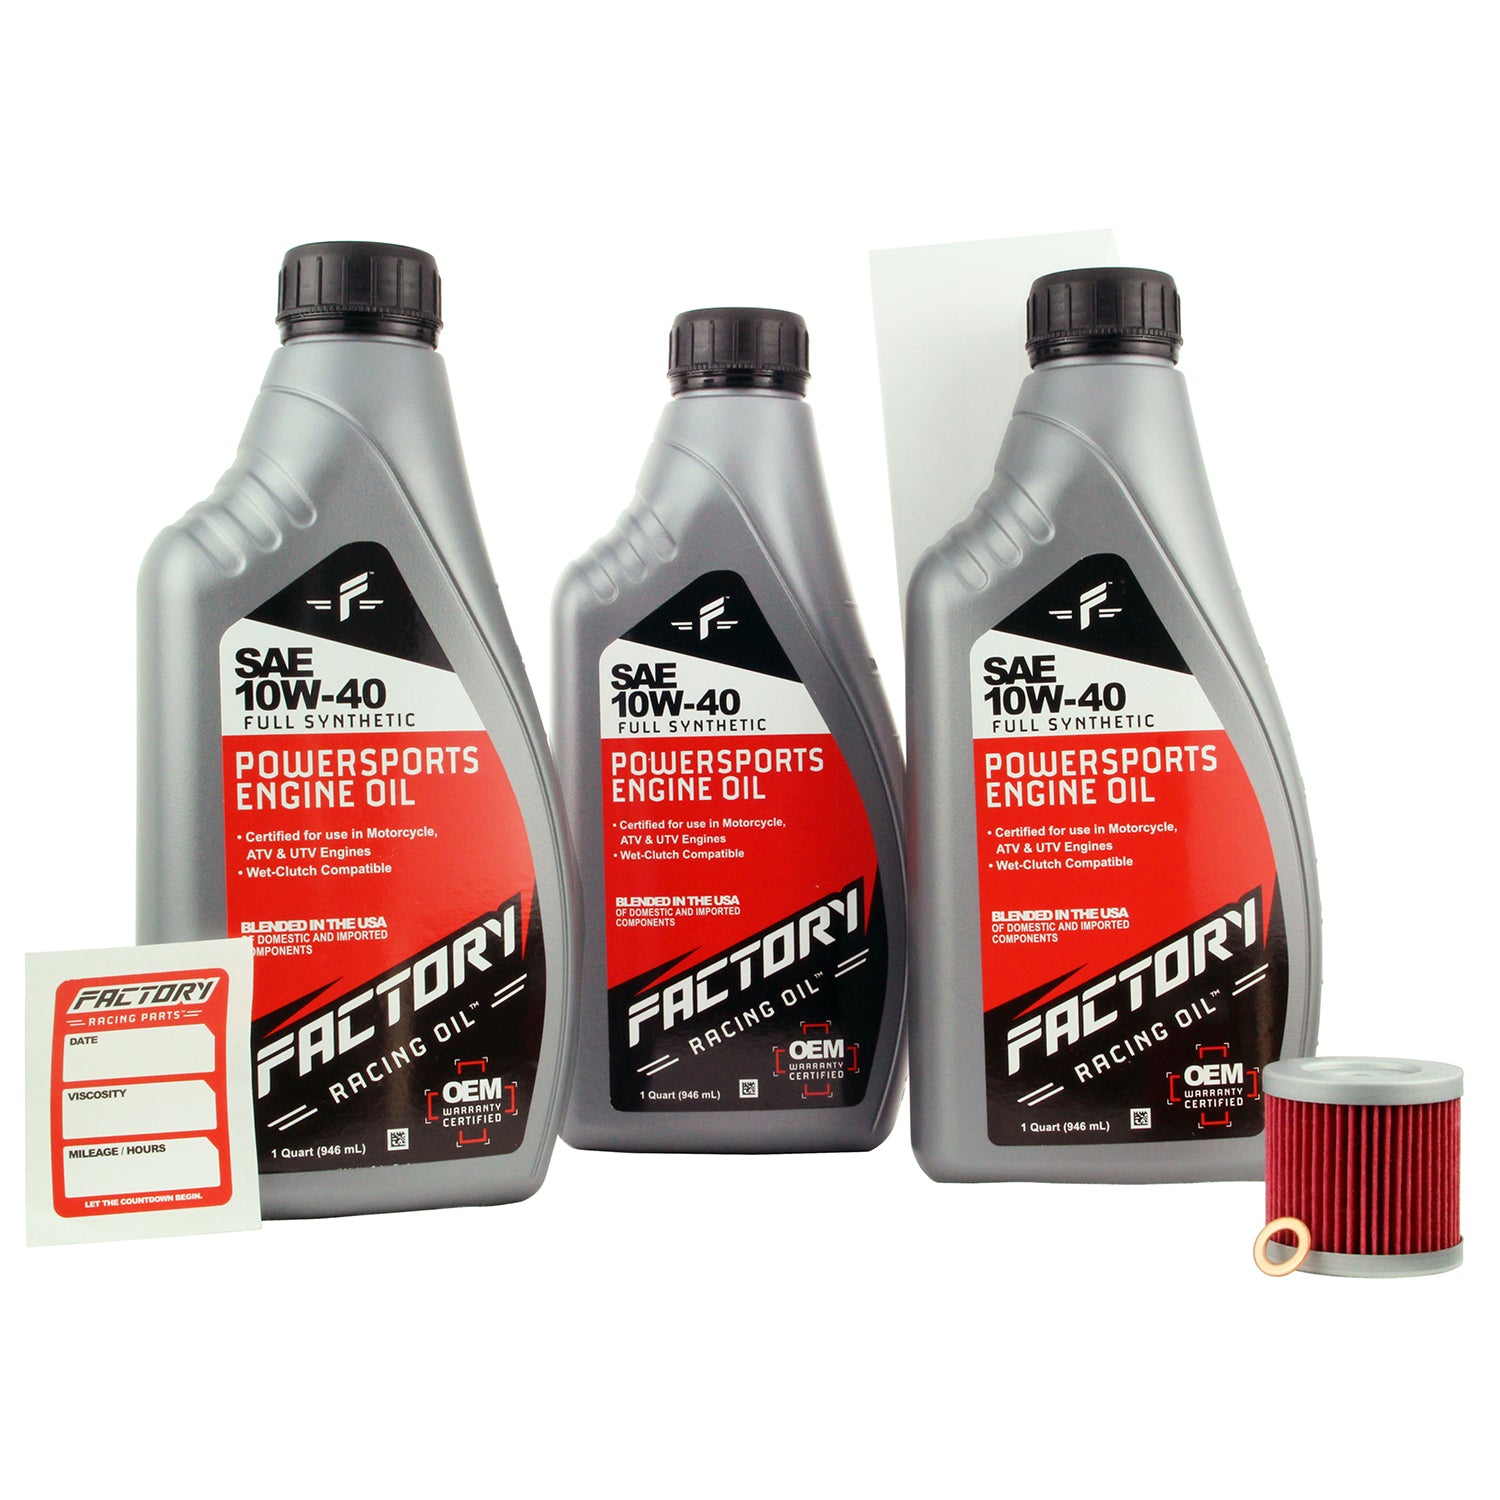 Factory Racing Parts Oil Change Kit Compatible with Suzuki Quadsport Z-400 – Includes 3 Quarts of SAE 10W-40 Full Synthetic Oil, 1 Filter, 1 Crush